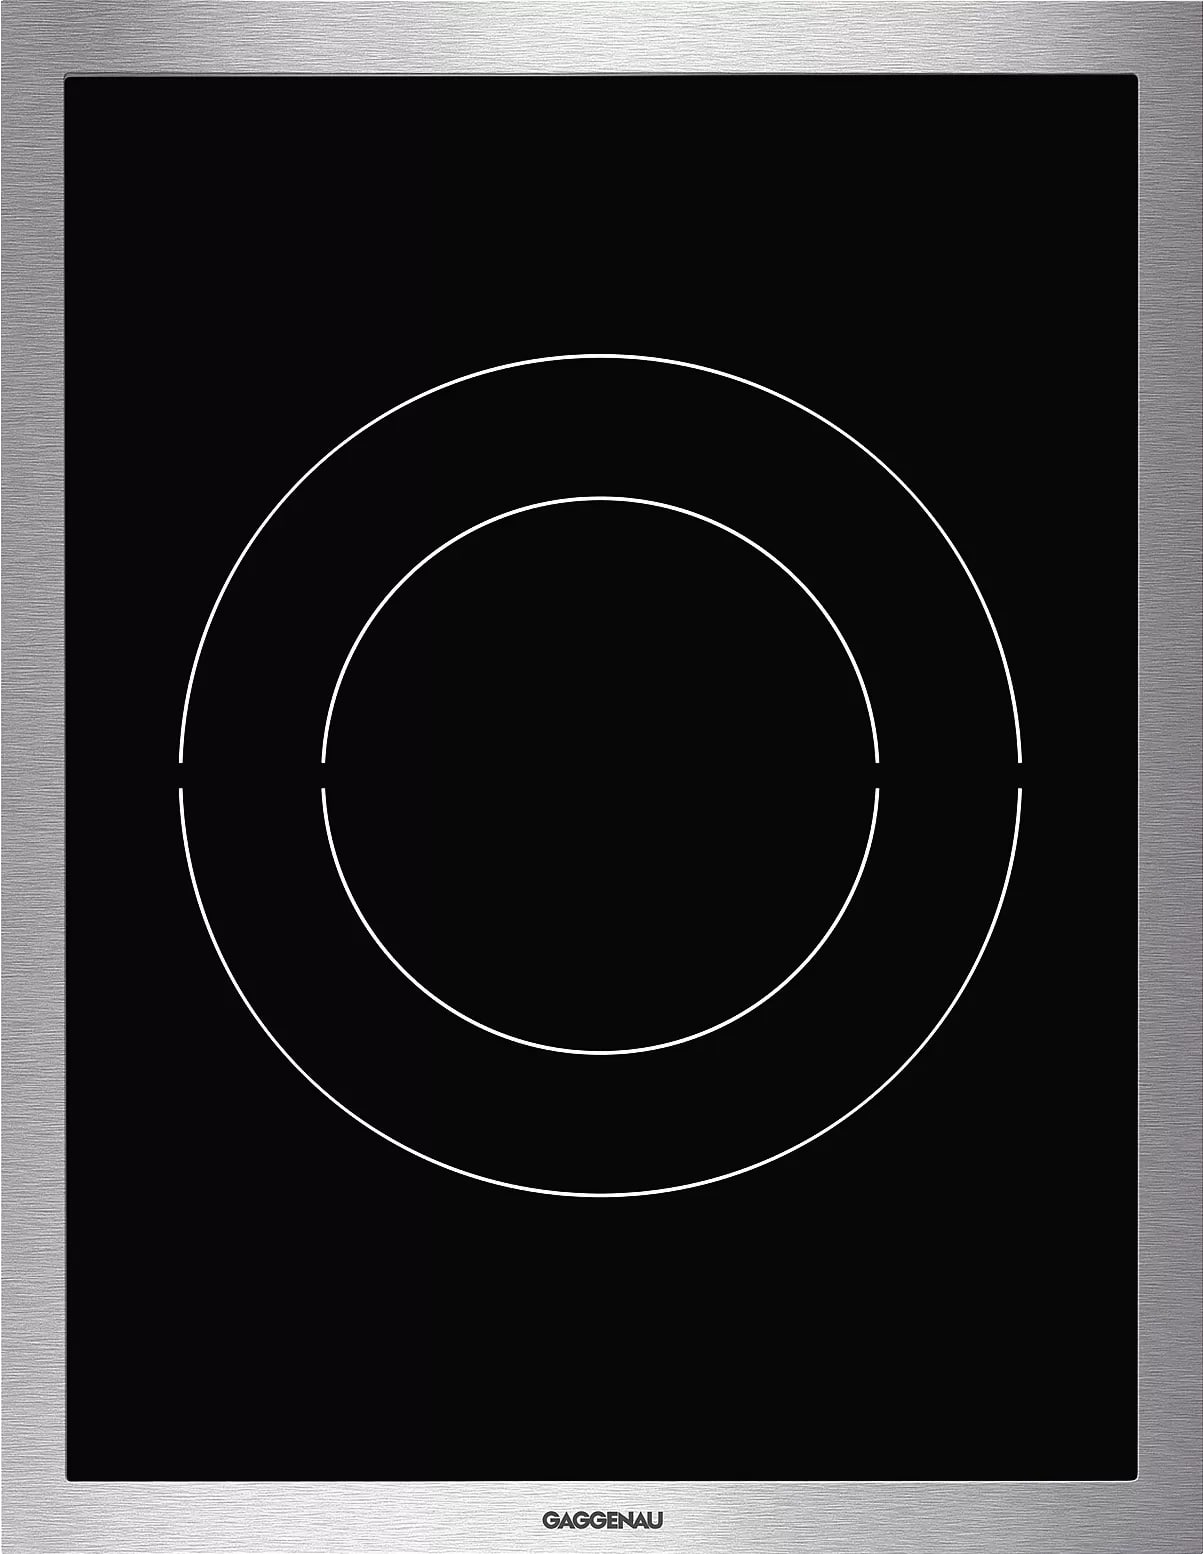 Gaggenau - 14.96 inch wide Induction Cooktop in Stainless - VI414610